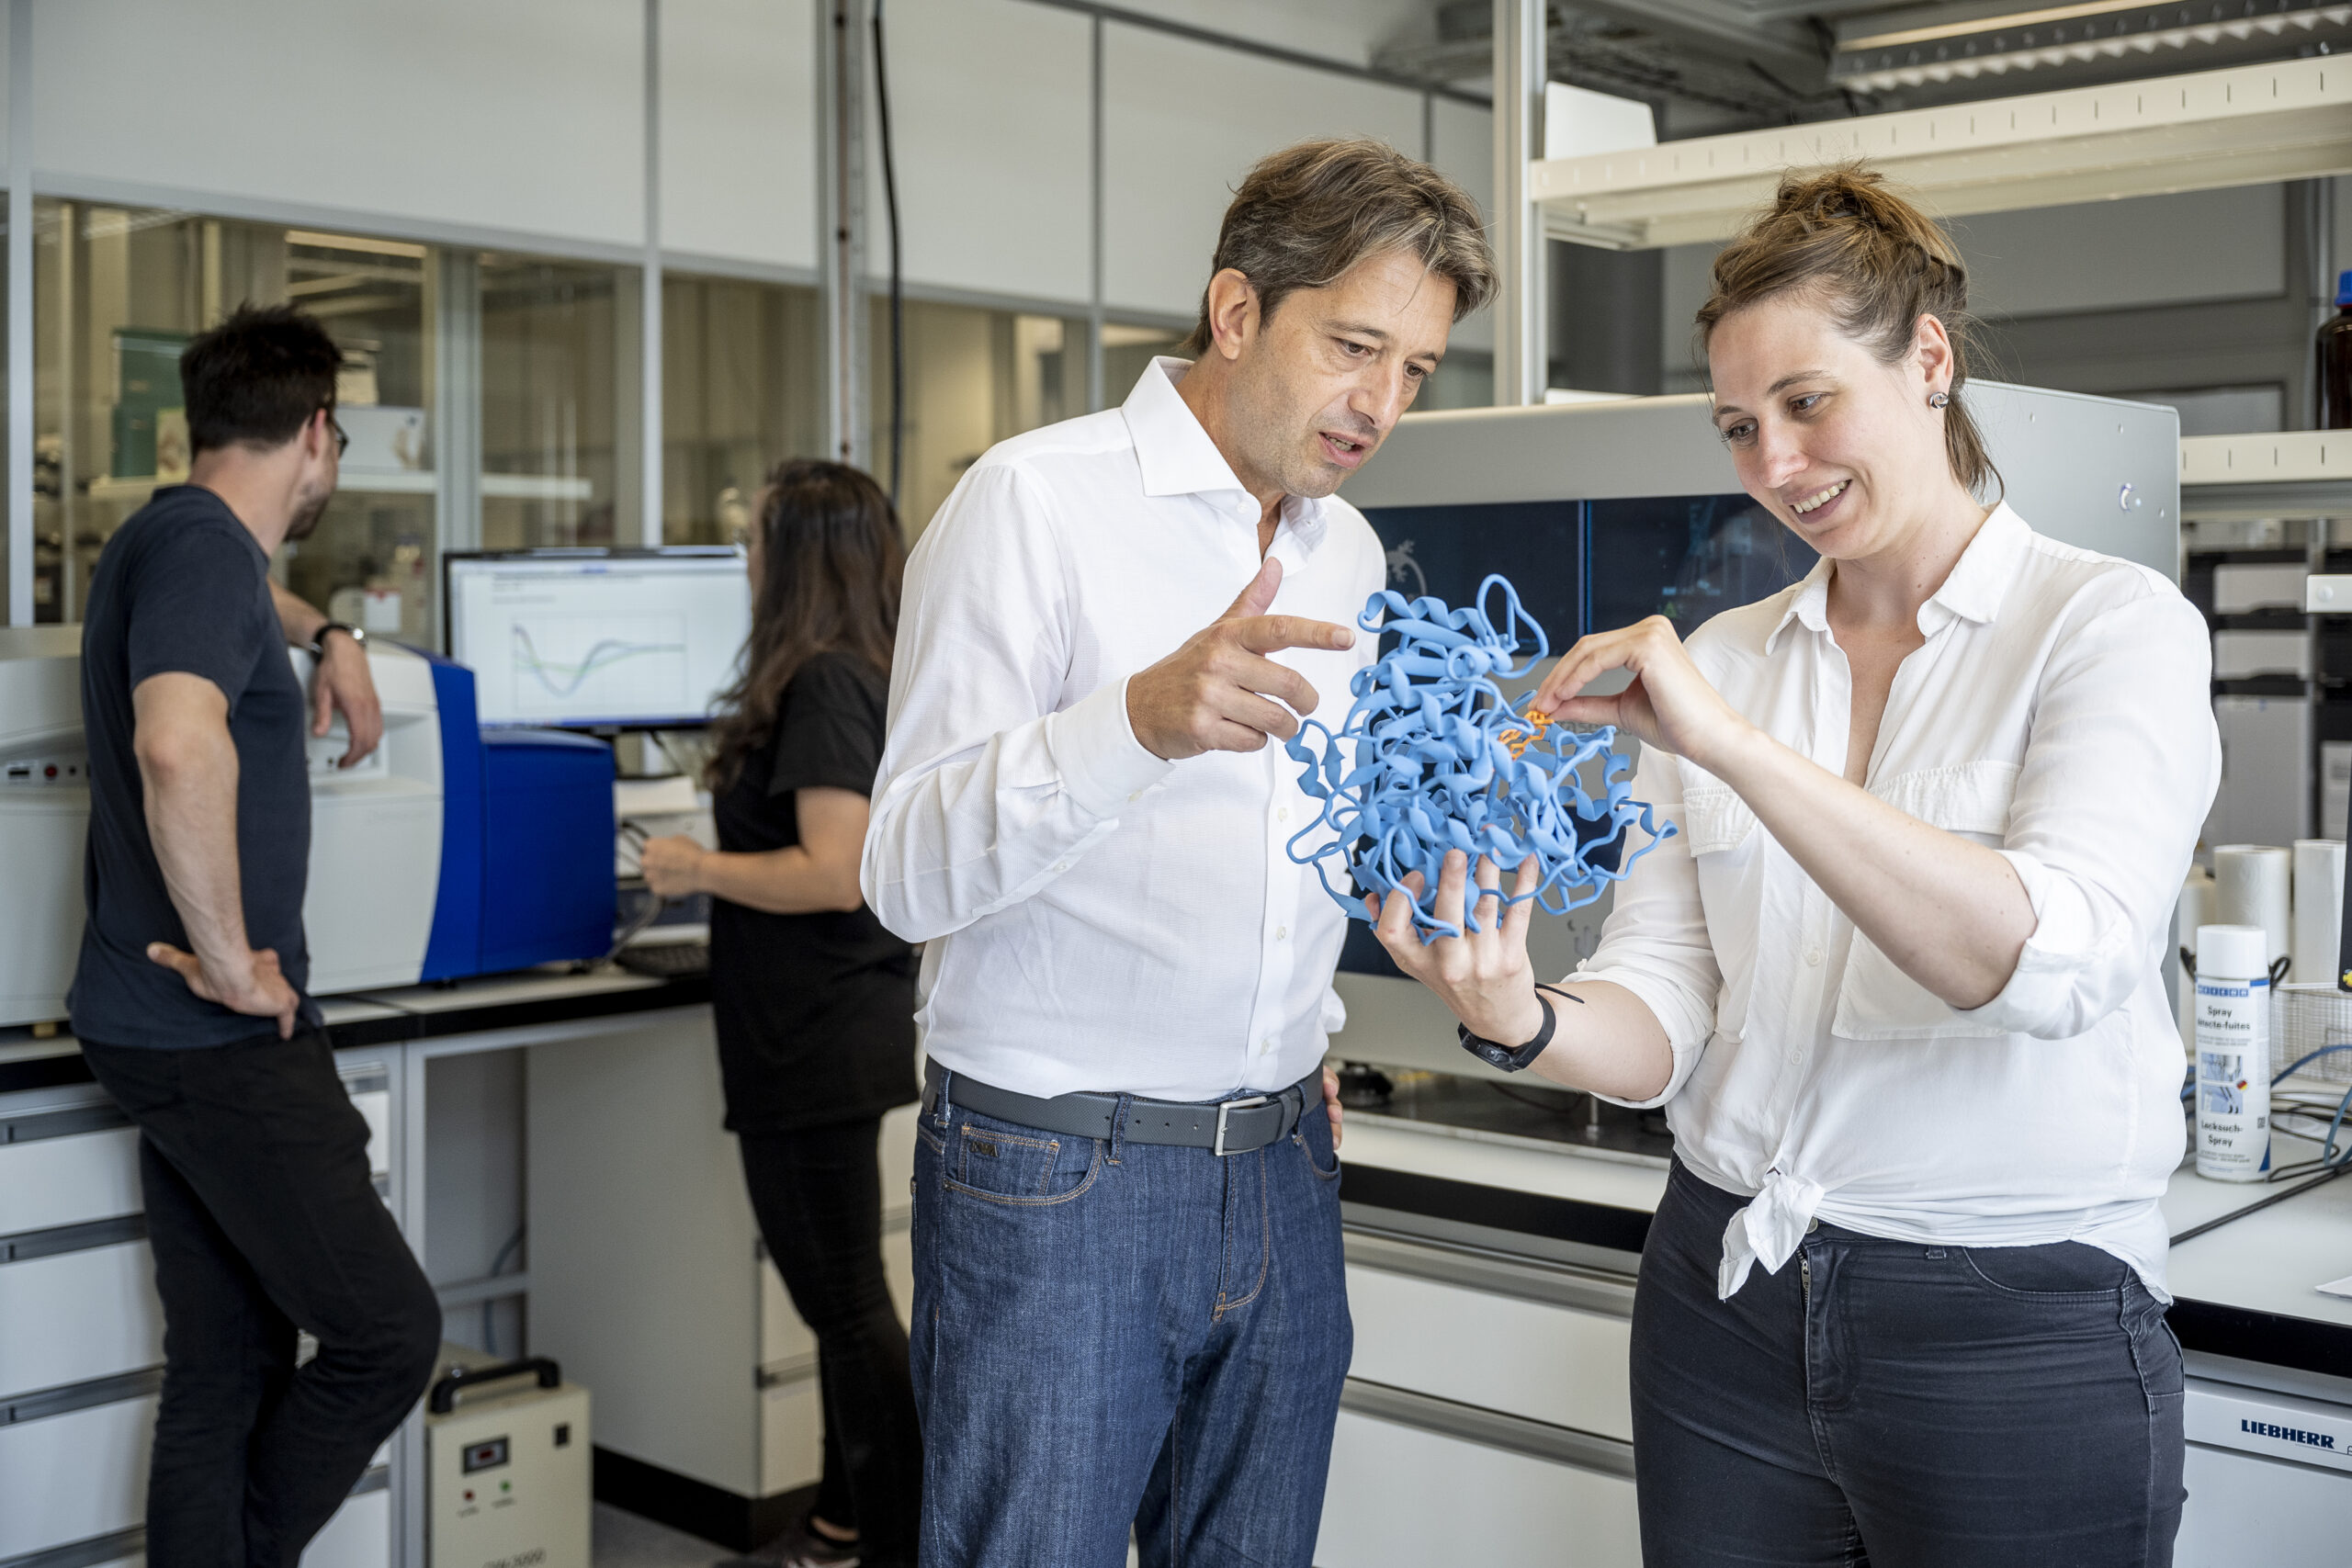 Gisbert Schneider with lab members at the Molecular Design Laboratory (MODLAB) at ETH Zurich. MODLAB develops new computer methods for medicinal chemistry and translates them into immediate practical application.